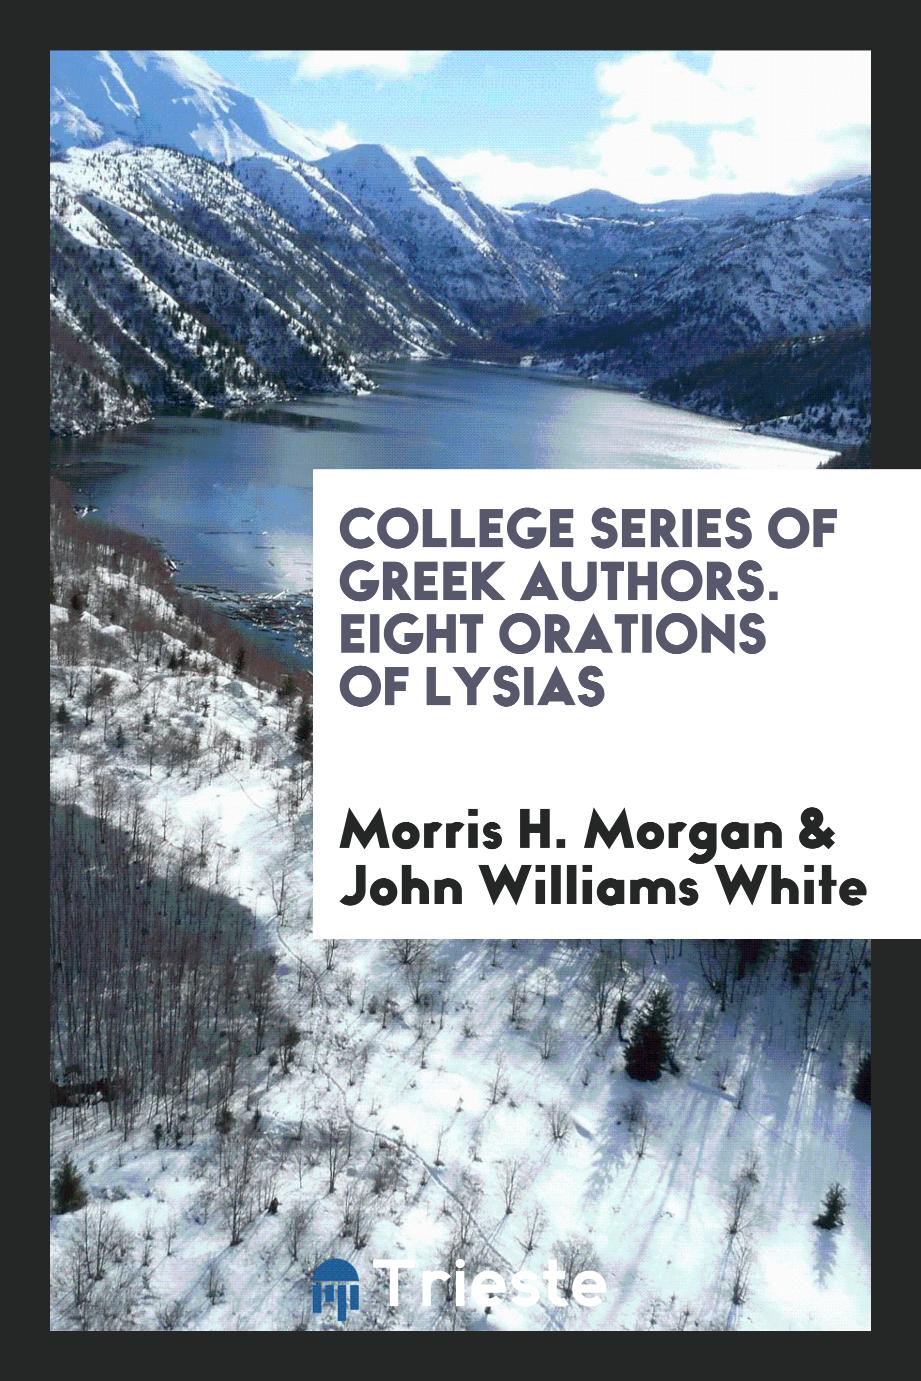 College Series of Greek Authors. Eight Orations of Lysias